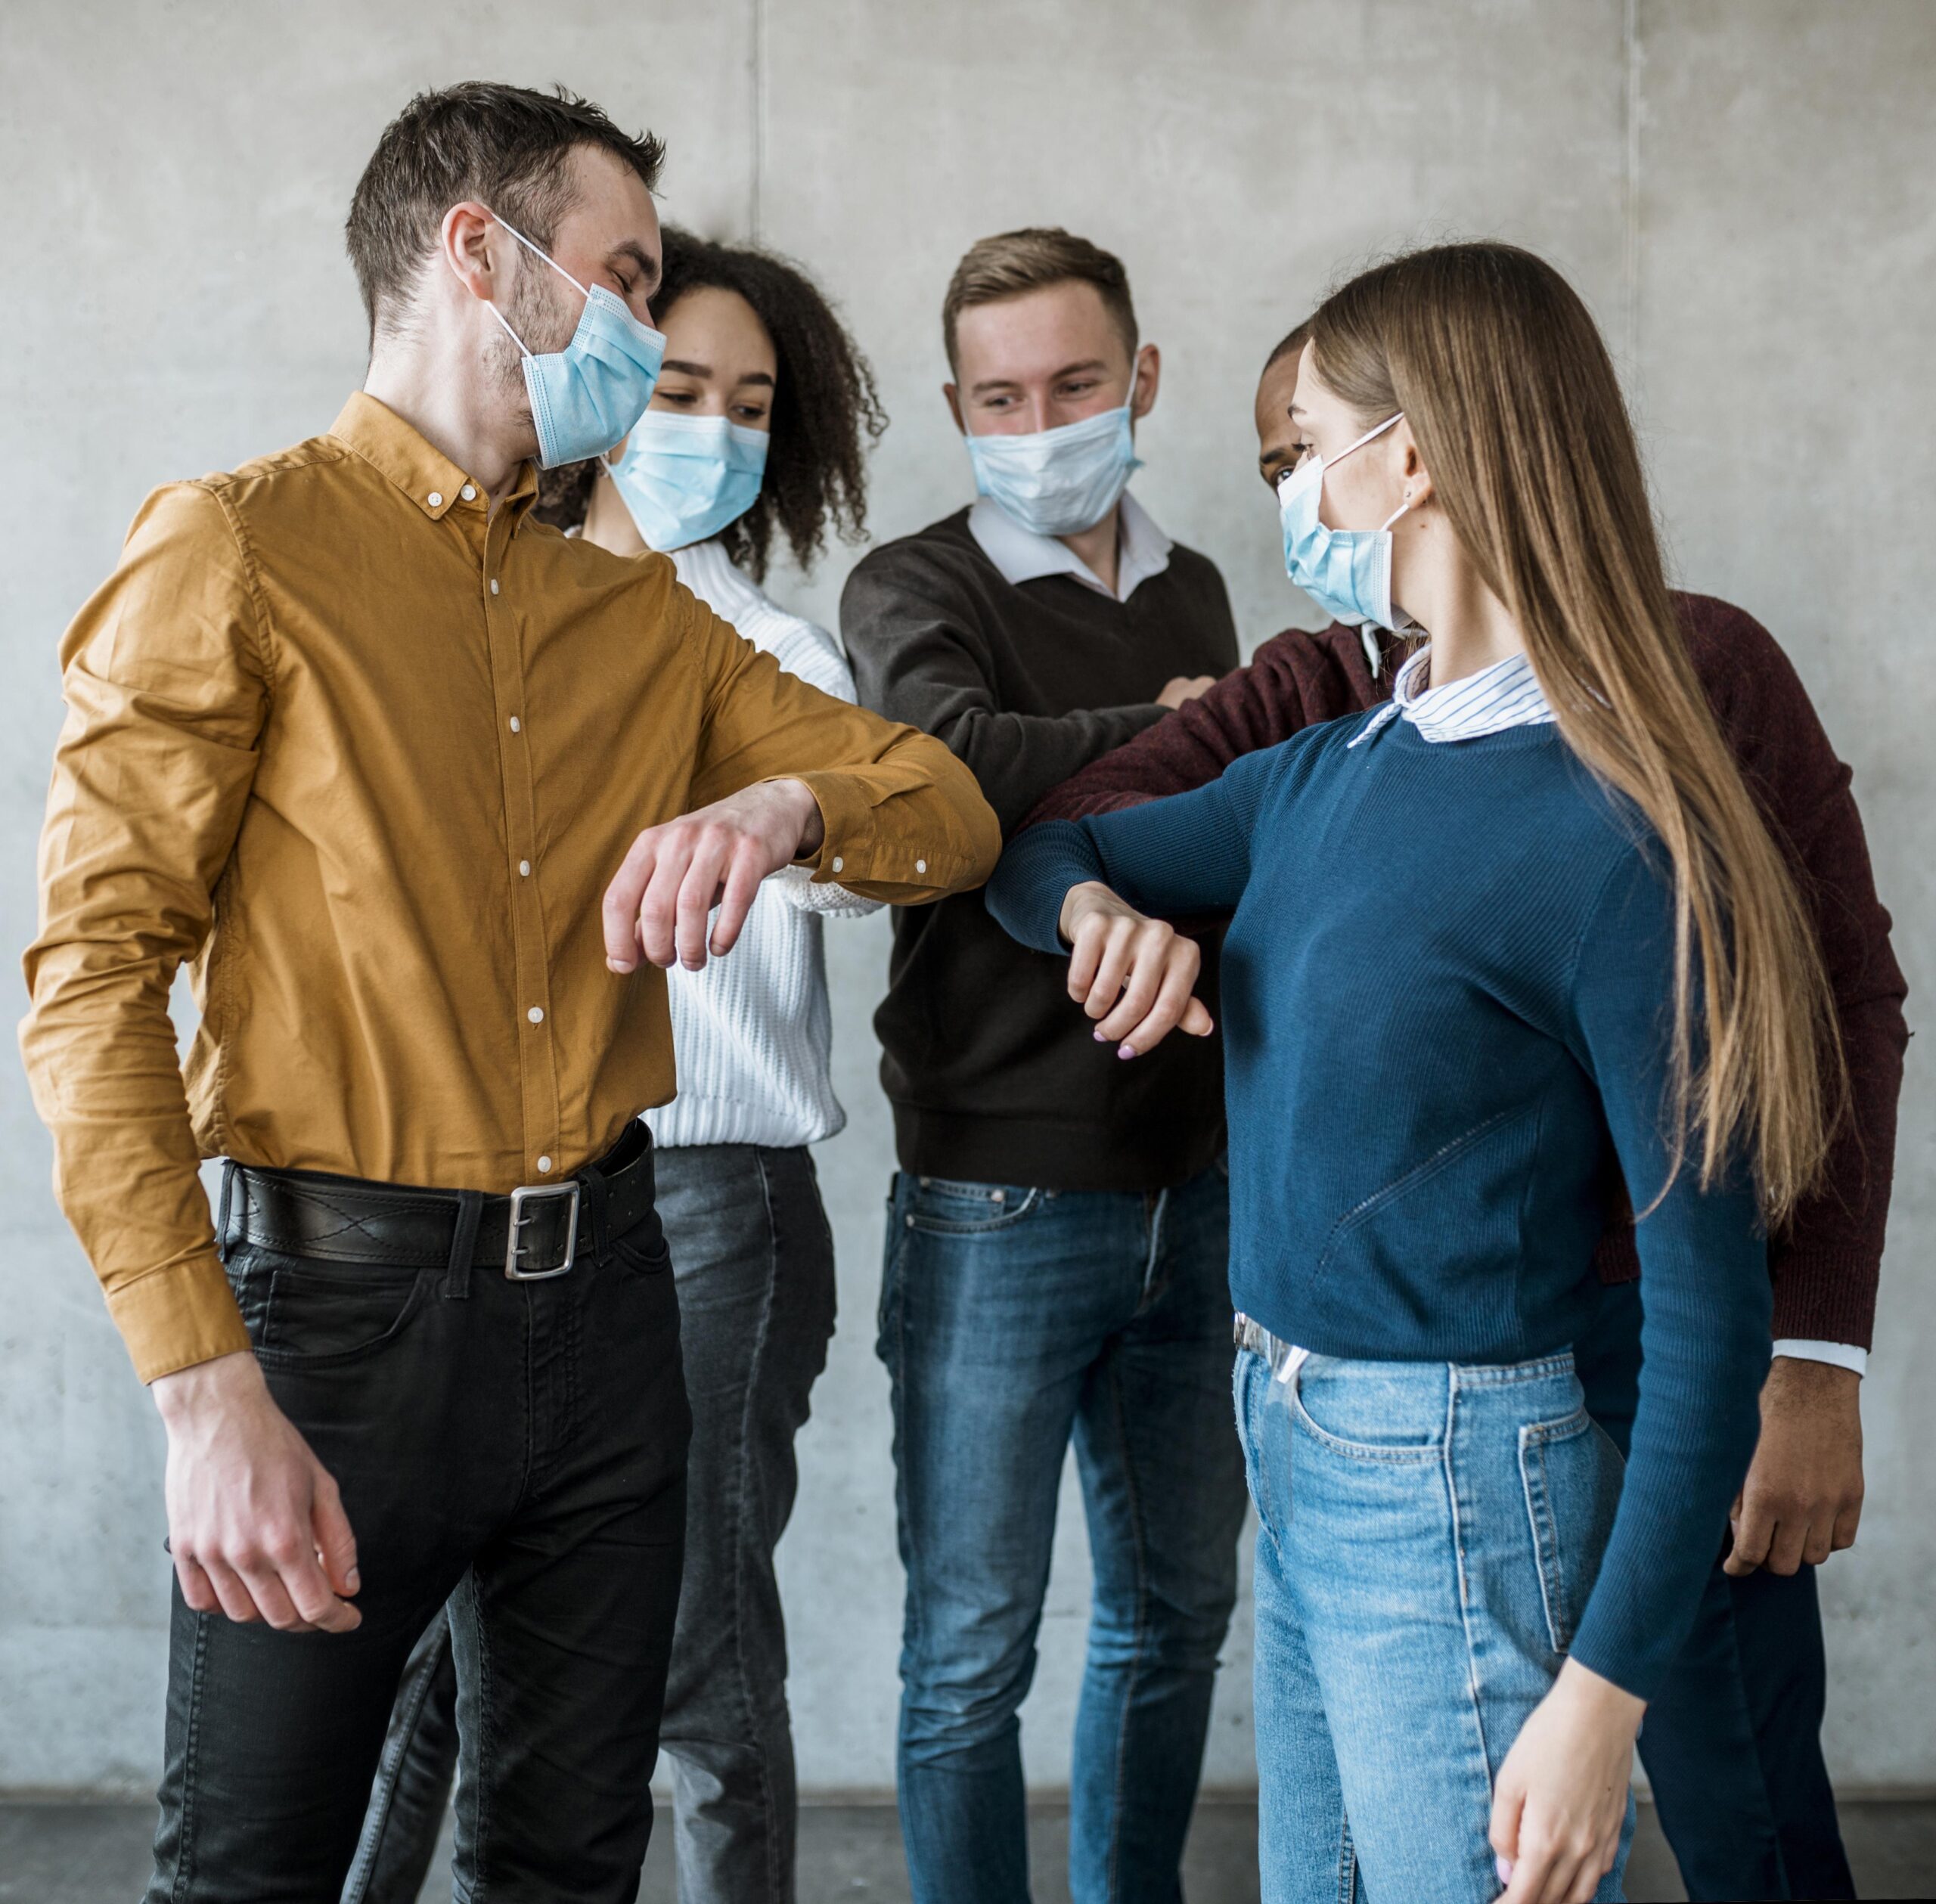 colleagues-with-medical-masks-doing-elbow-salute-meeting